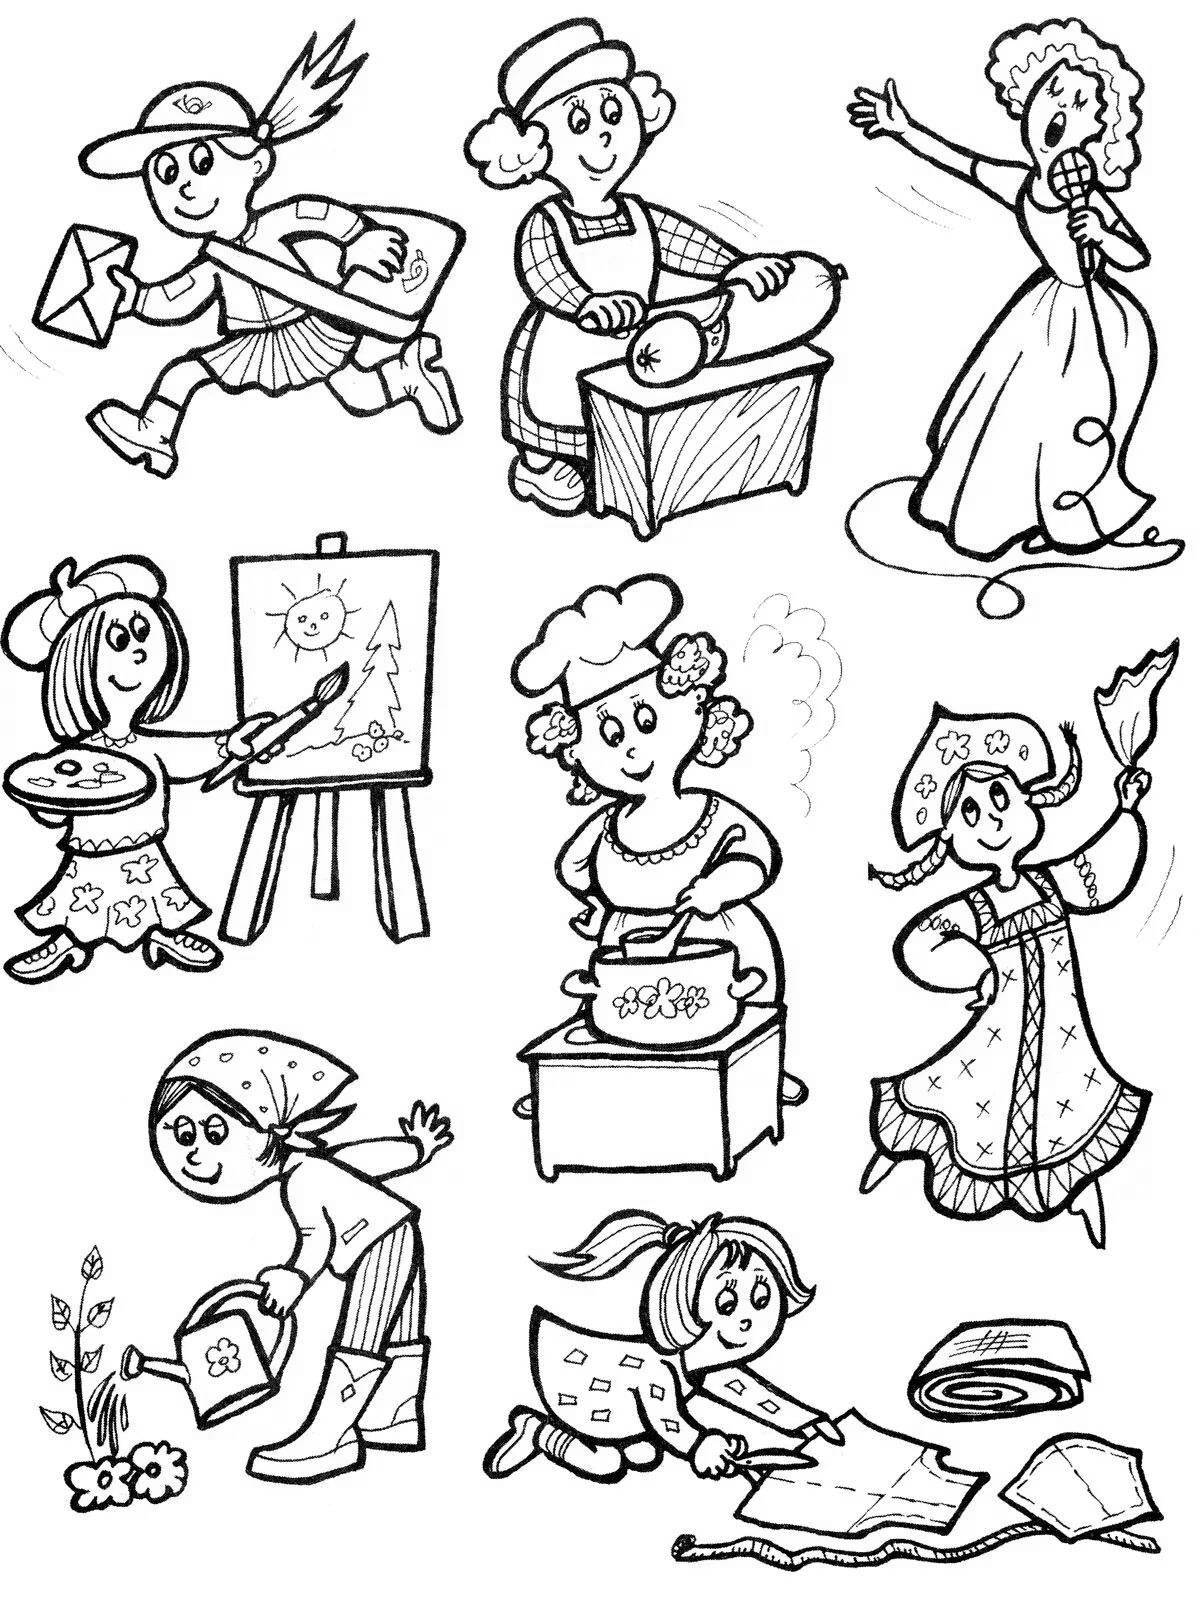 Coloring page of funny verbs